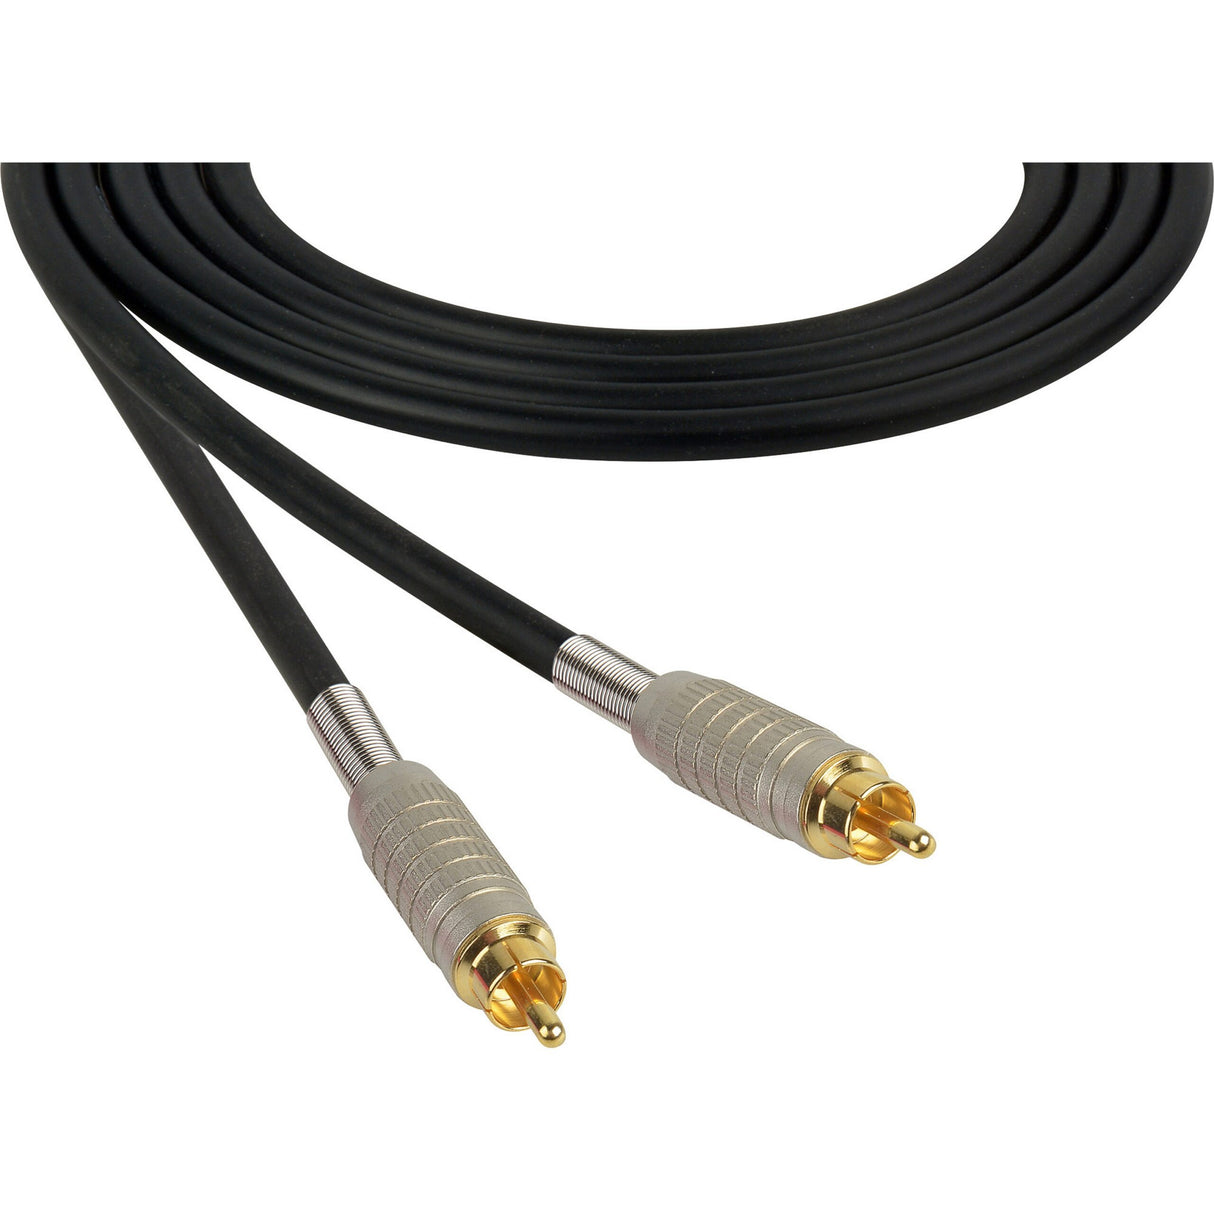 Connectronics Premium RCA Male to RCA Male Audio Cable, 10 Foot